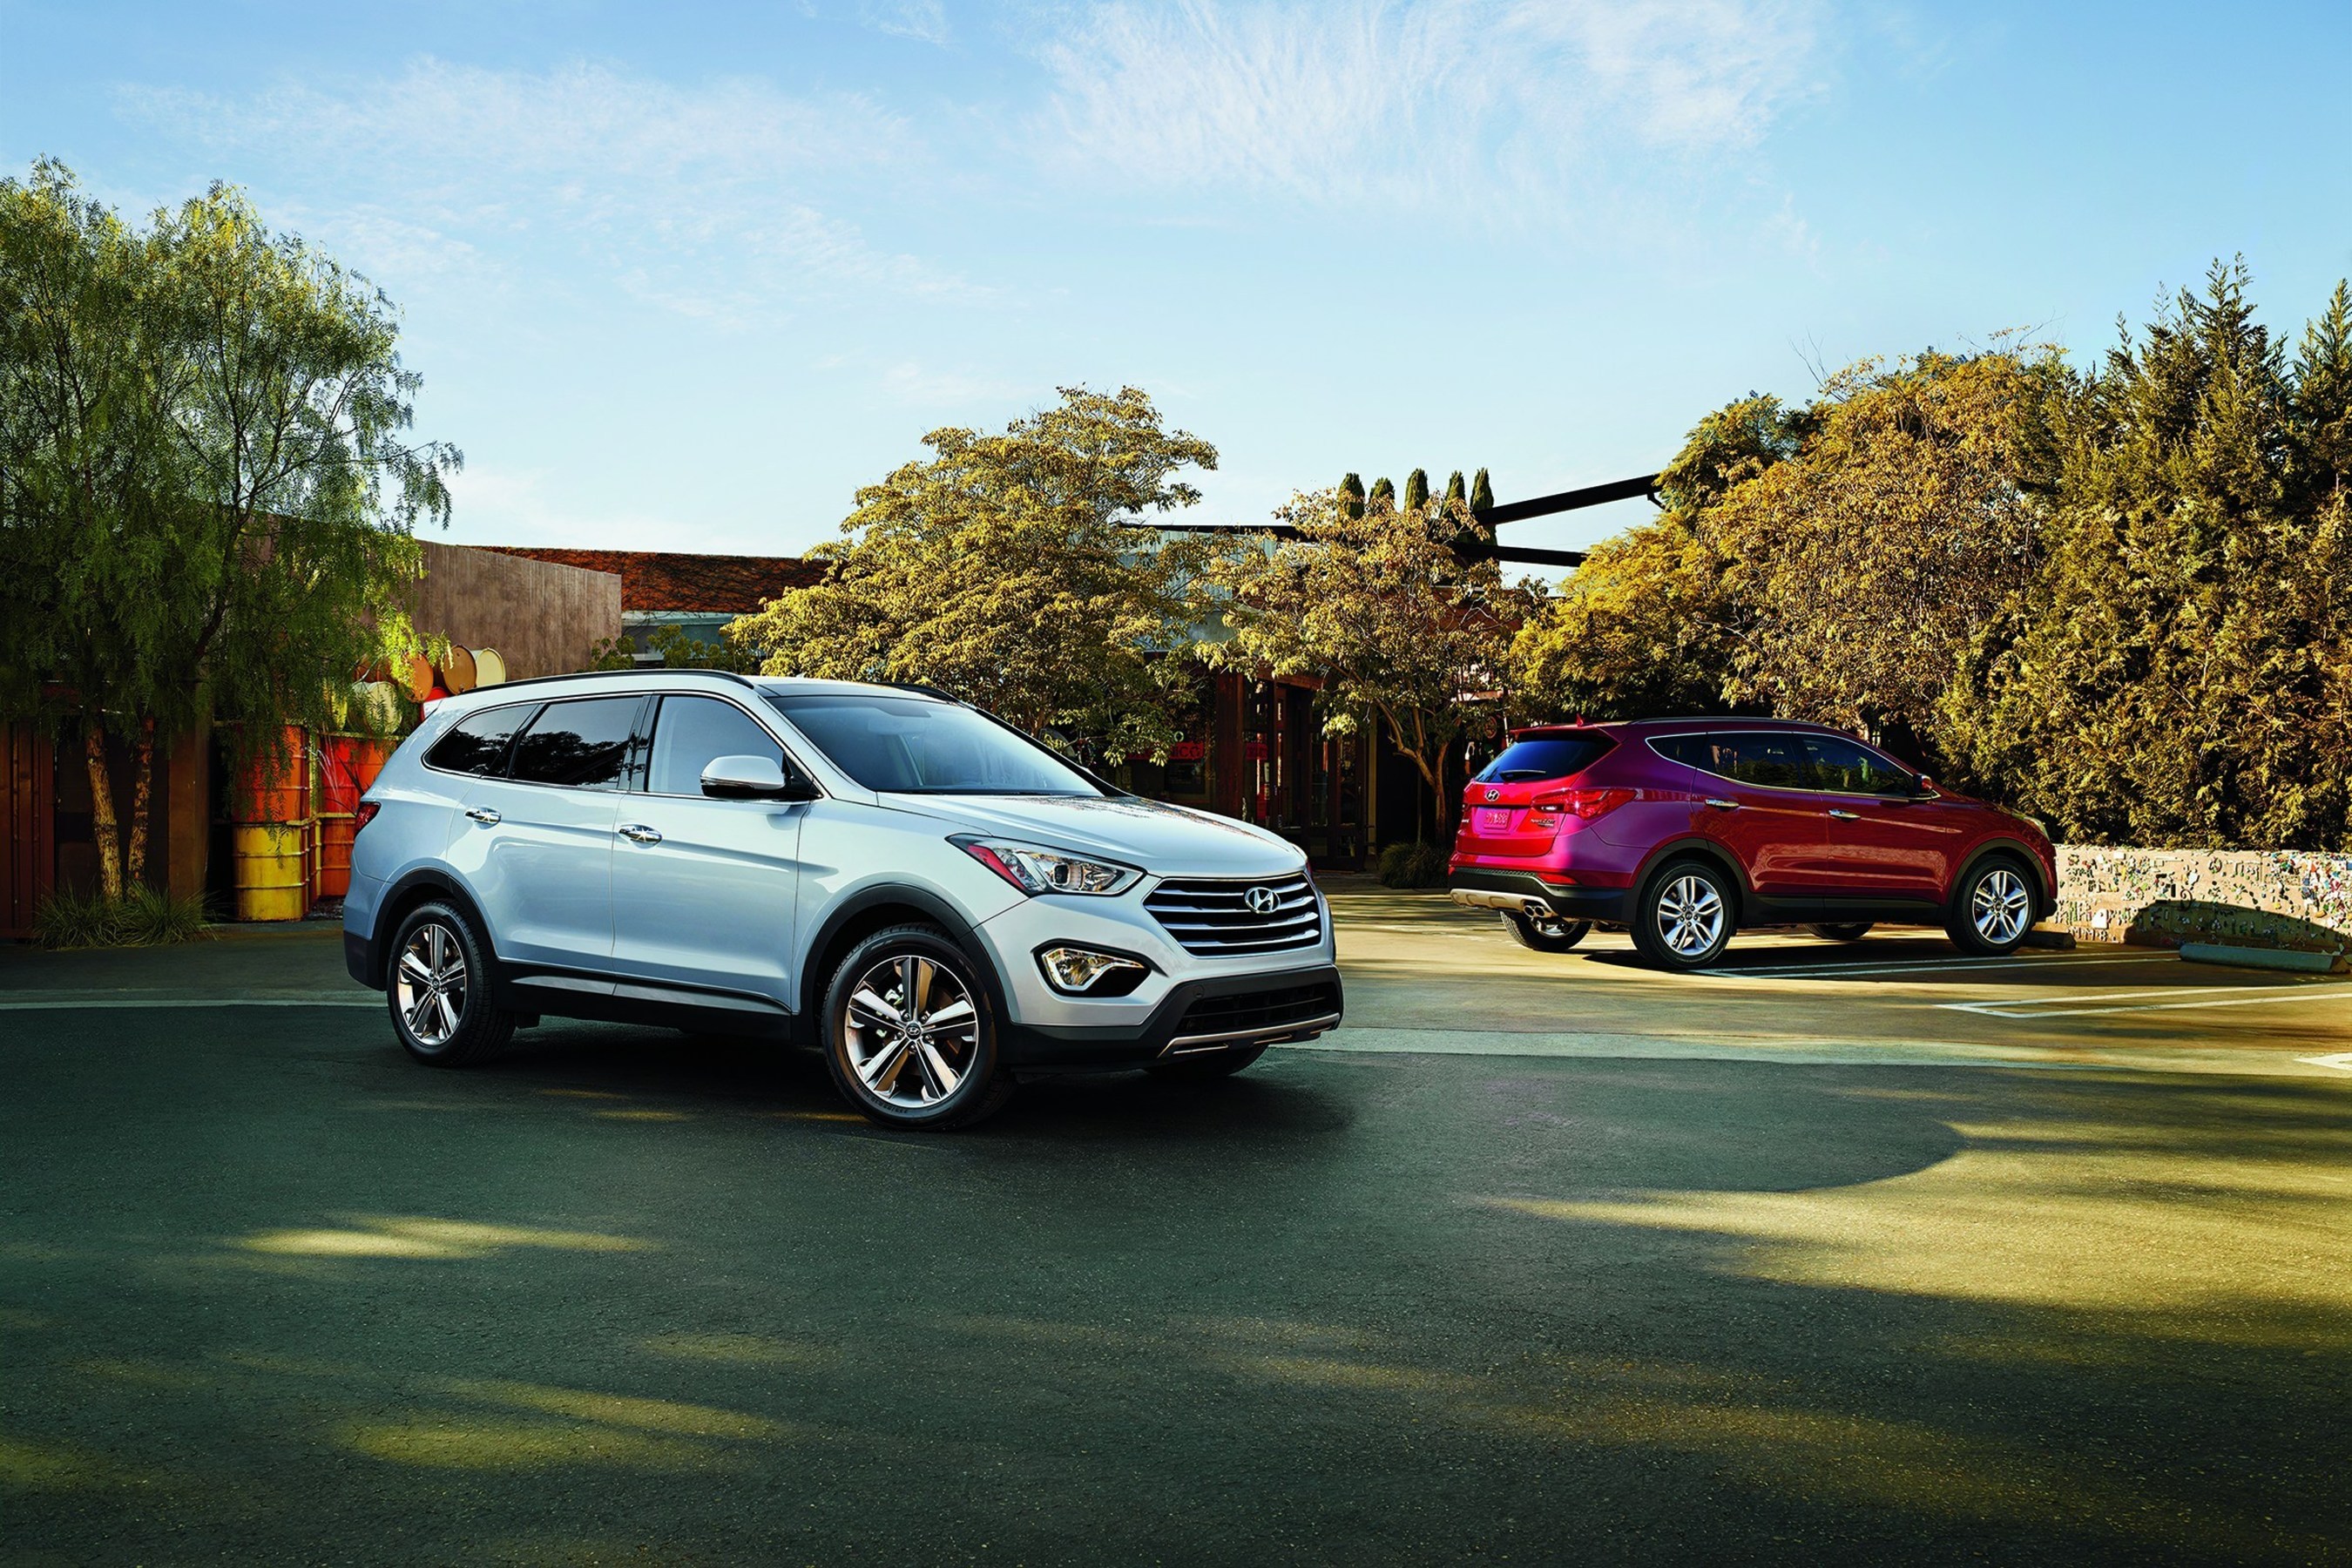 2015 HYUNDAI SANTA FE LINEUP OFFERS NEW STANDARD FEATURES, REVISED STEERING AND SUSPENSION TUNING